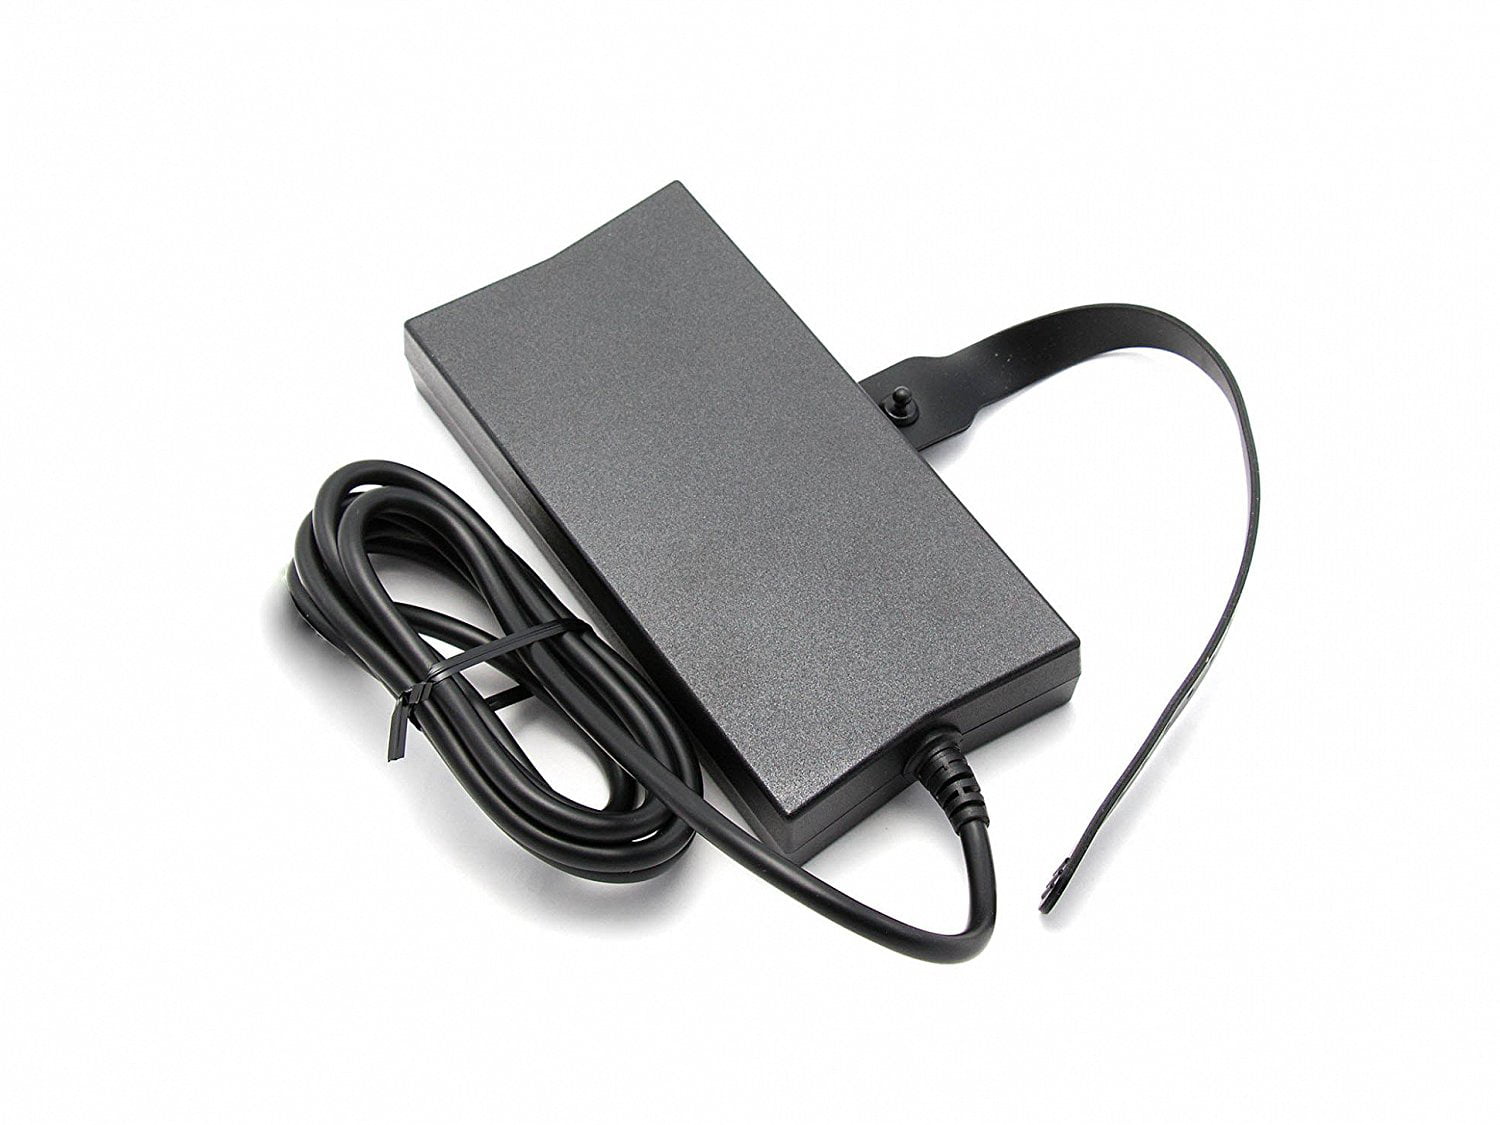 Genuine DELL Precision M2400 M60 M6700 M70 AC Adapter Charger Power Supply 130W 